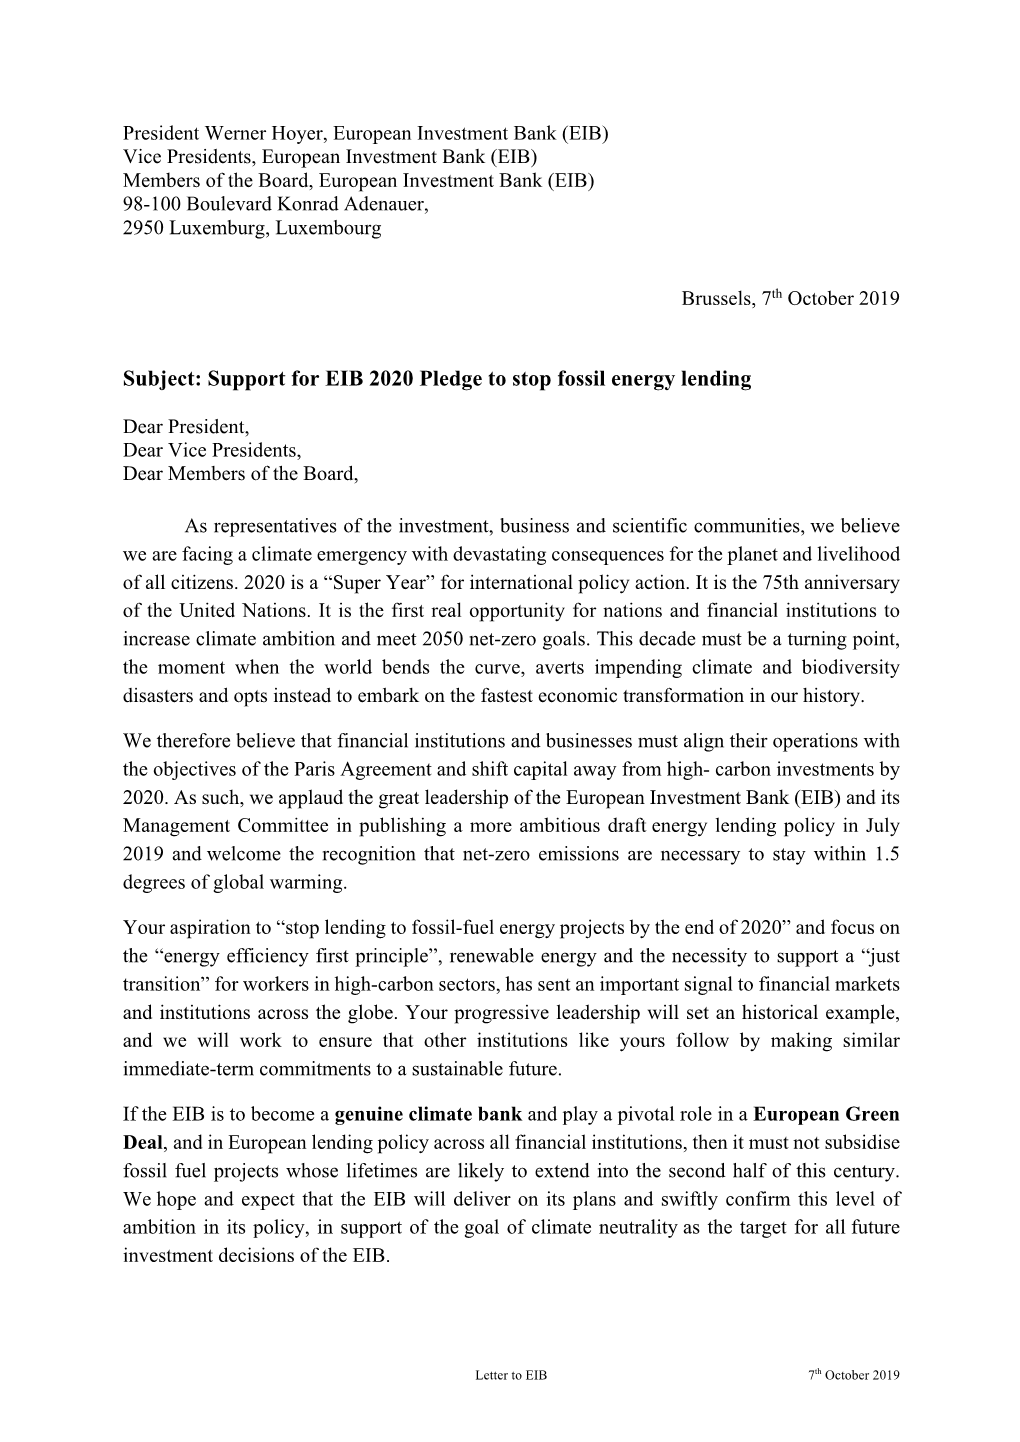 Support for EIB 2020 Pledge to Stop Fossil Energy Lending